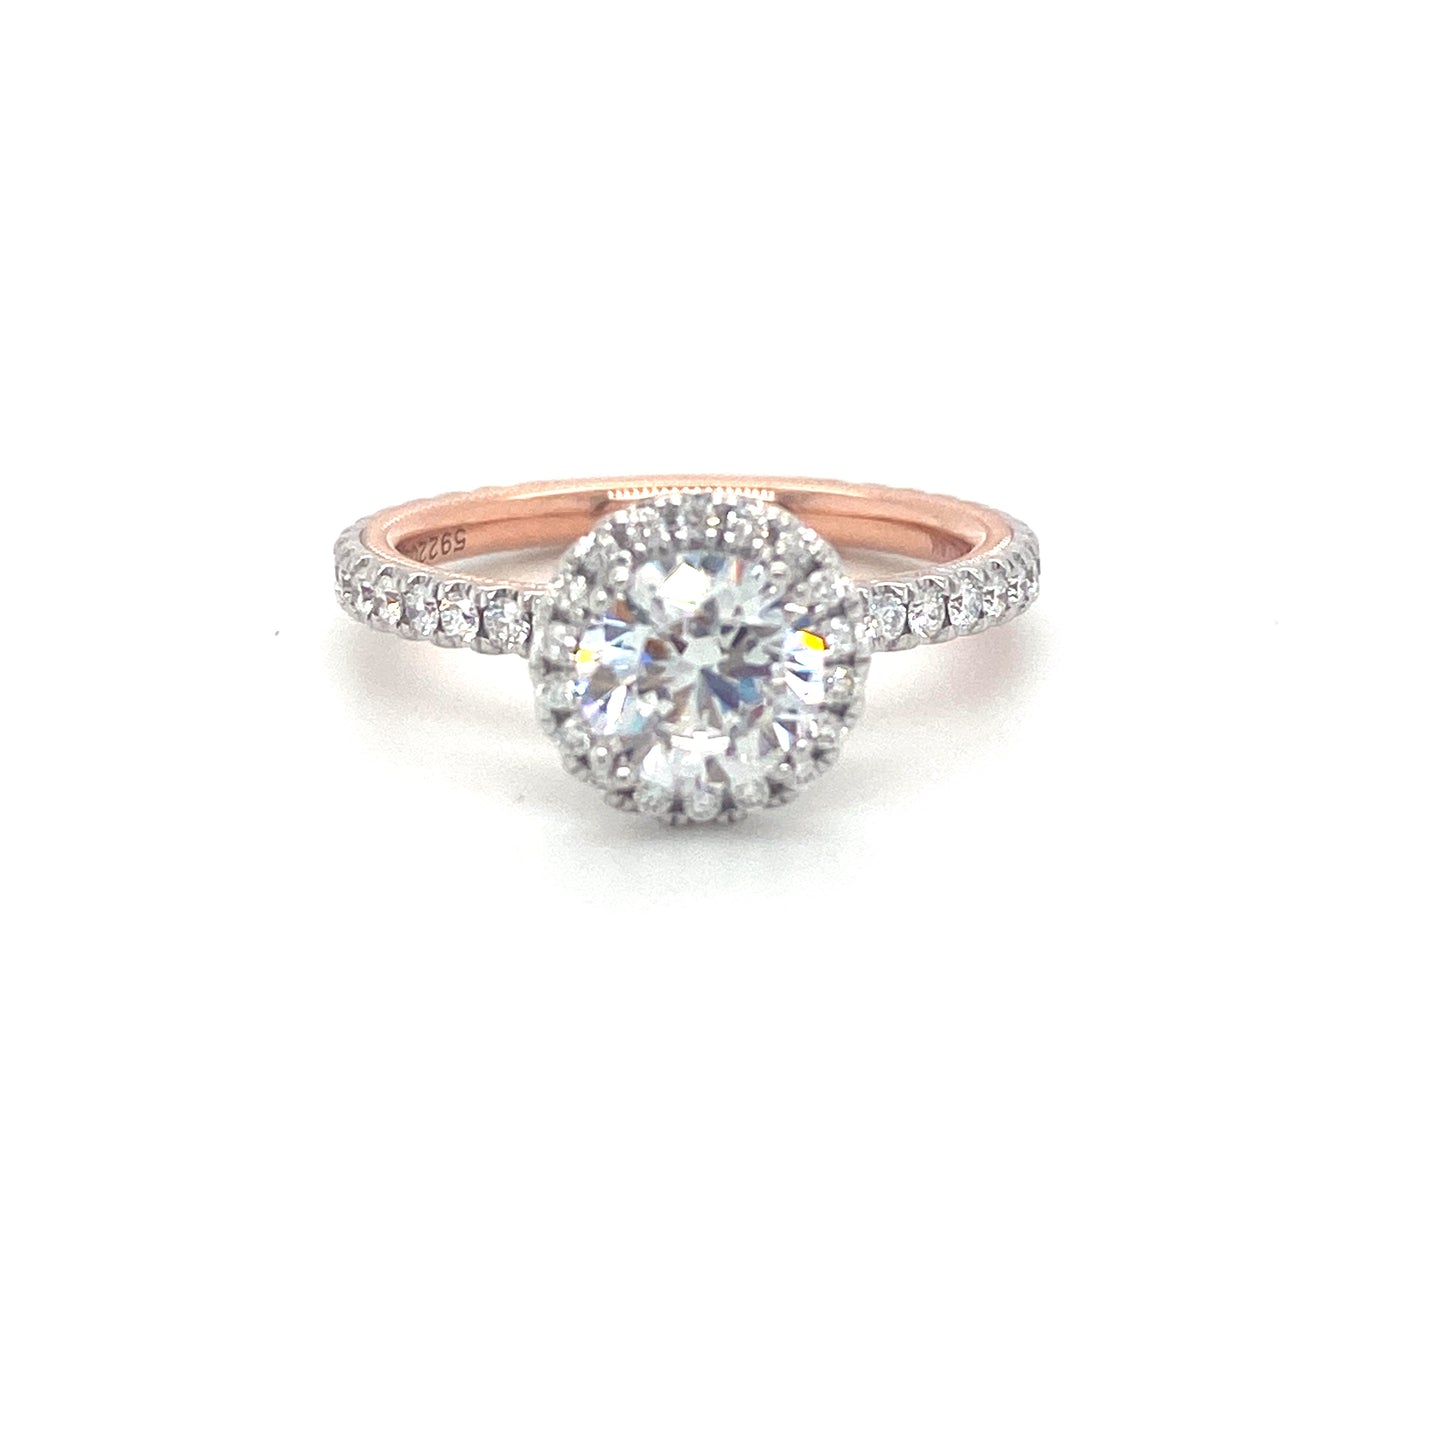 Verragio Tradition Collection White And Rose Gold Round Halo Semi-Mount Engagement Ring - Diamond Semi-Mount Rings